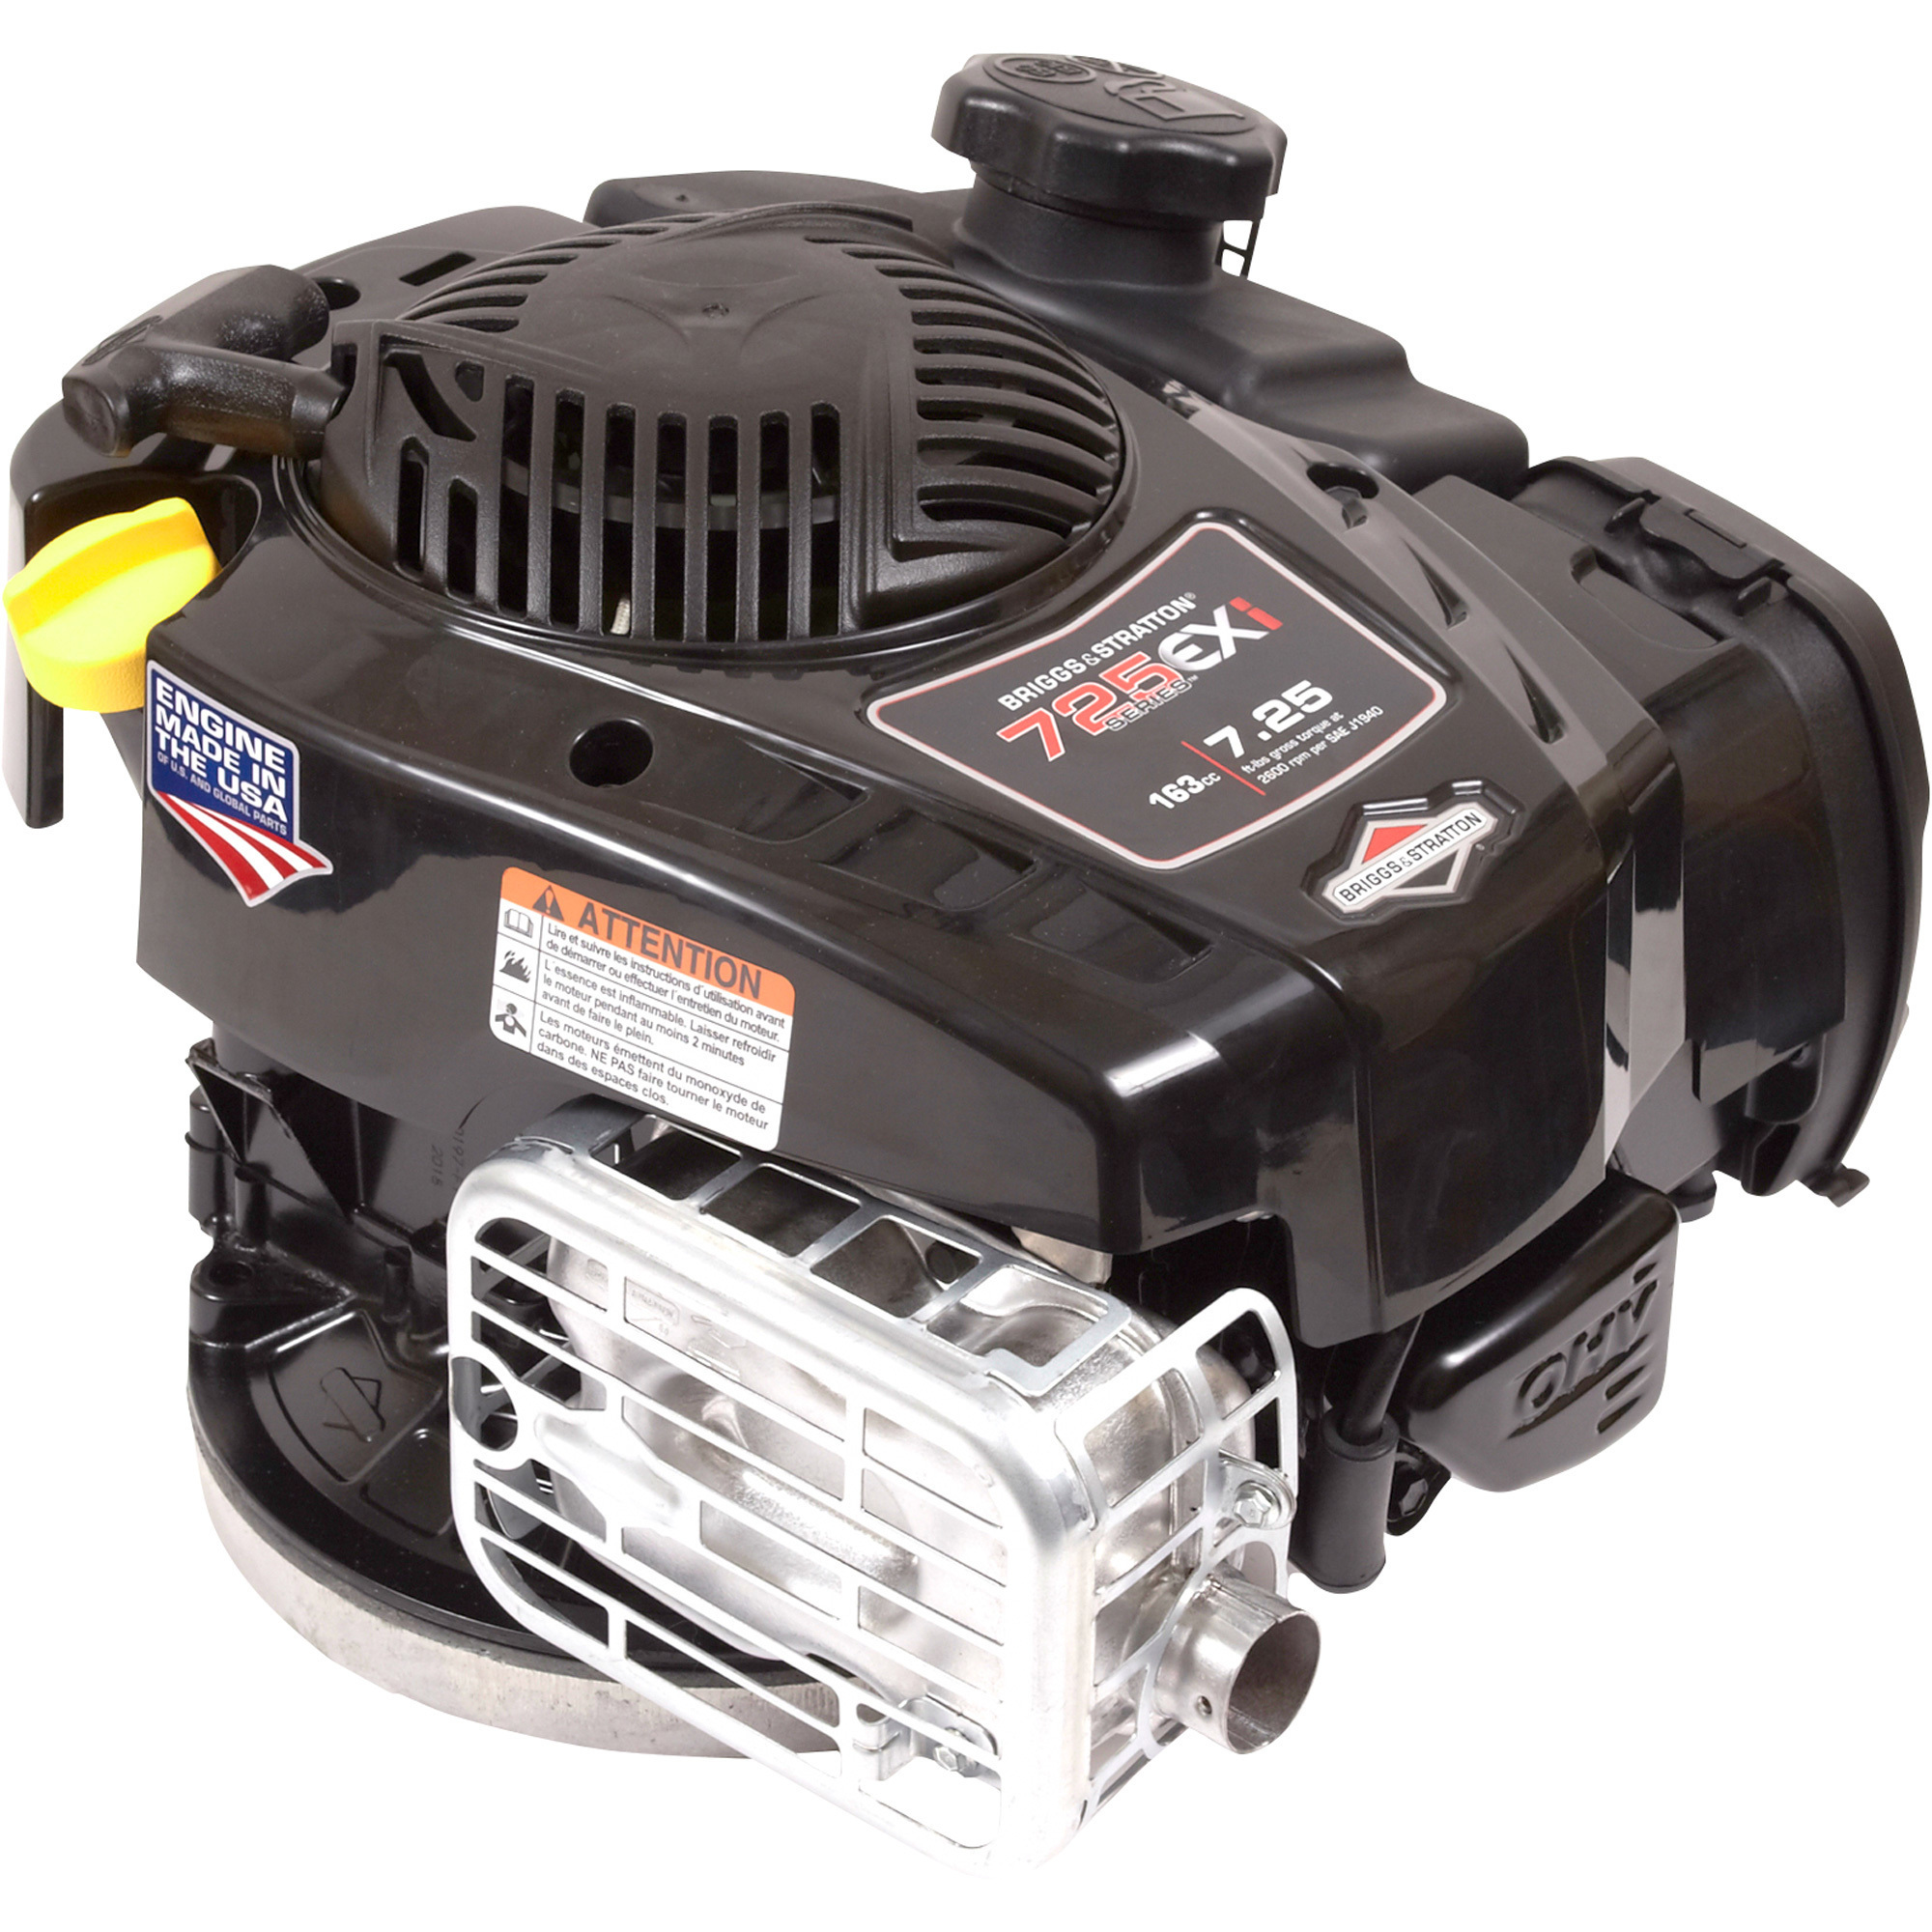 Briggs And Stratton Ohv Lawn Mower Engine — 163cc 78in X 3 532in